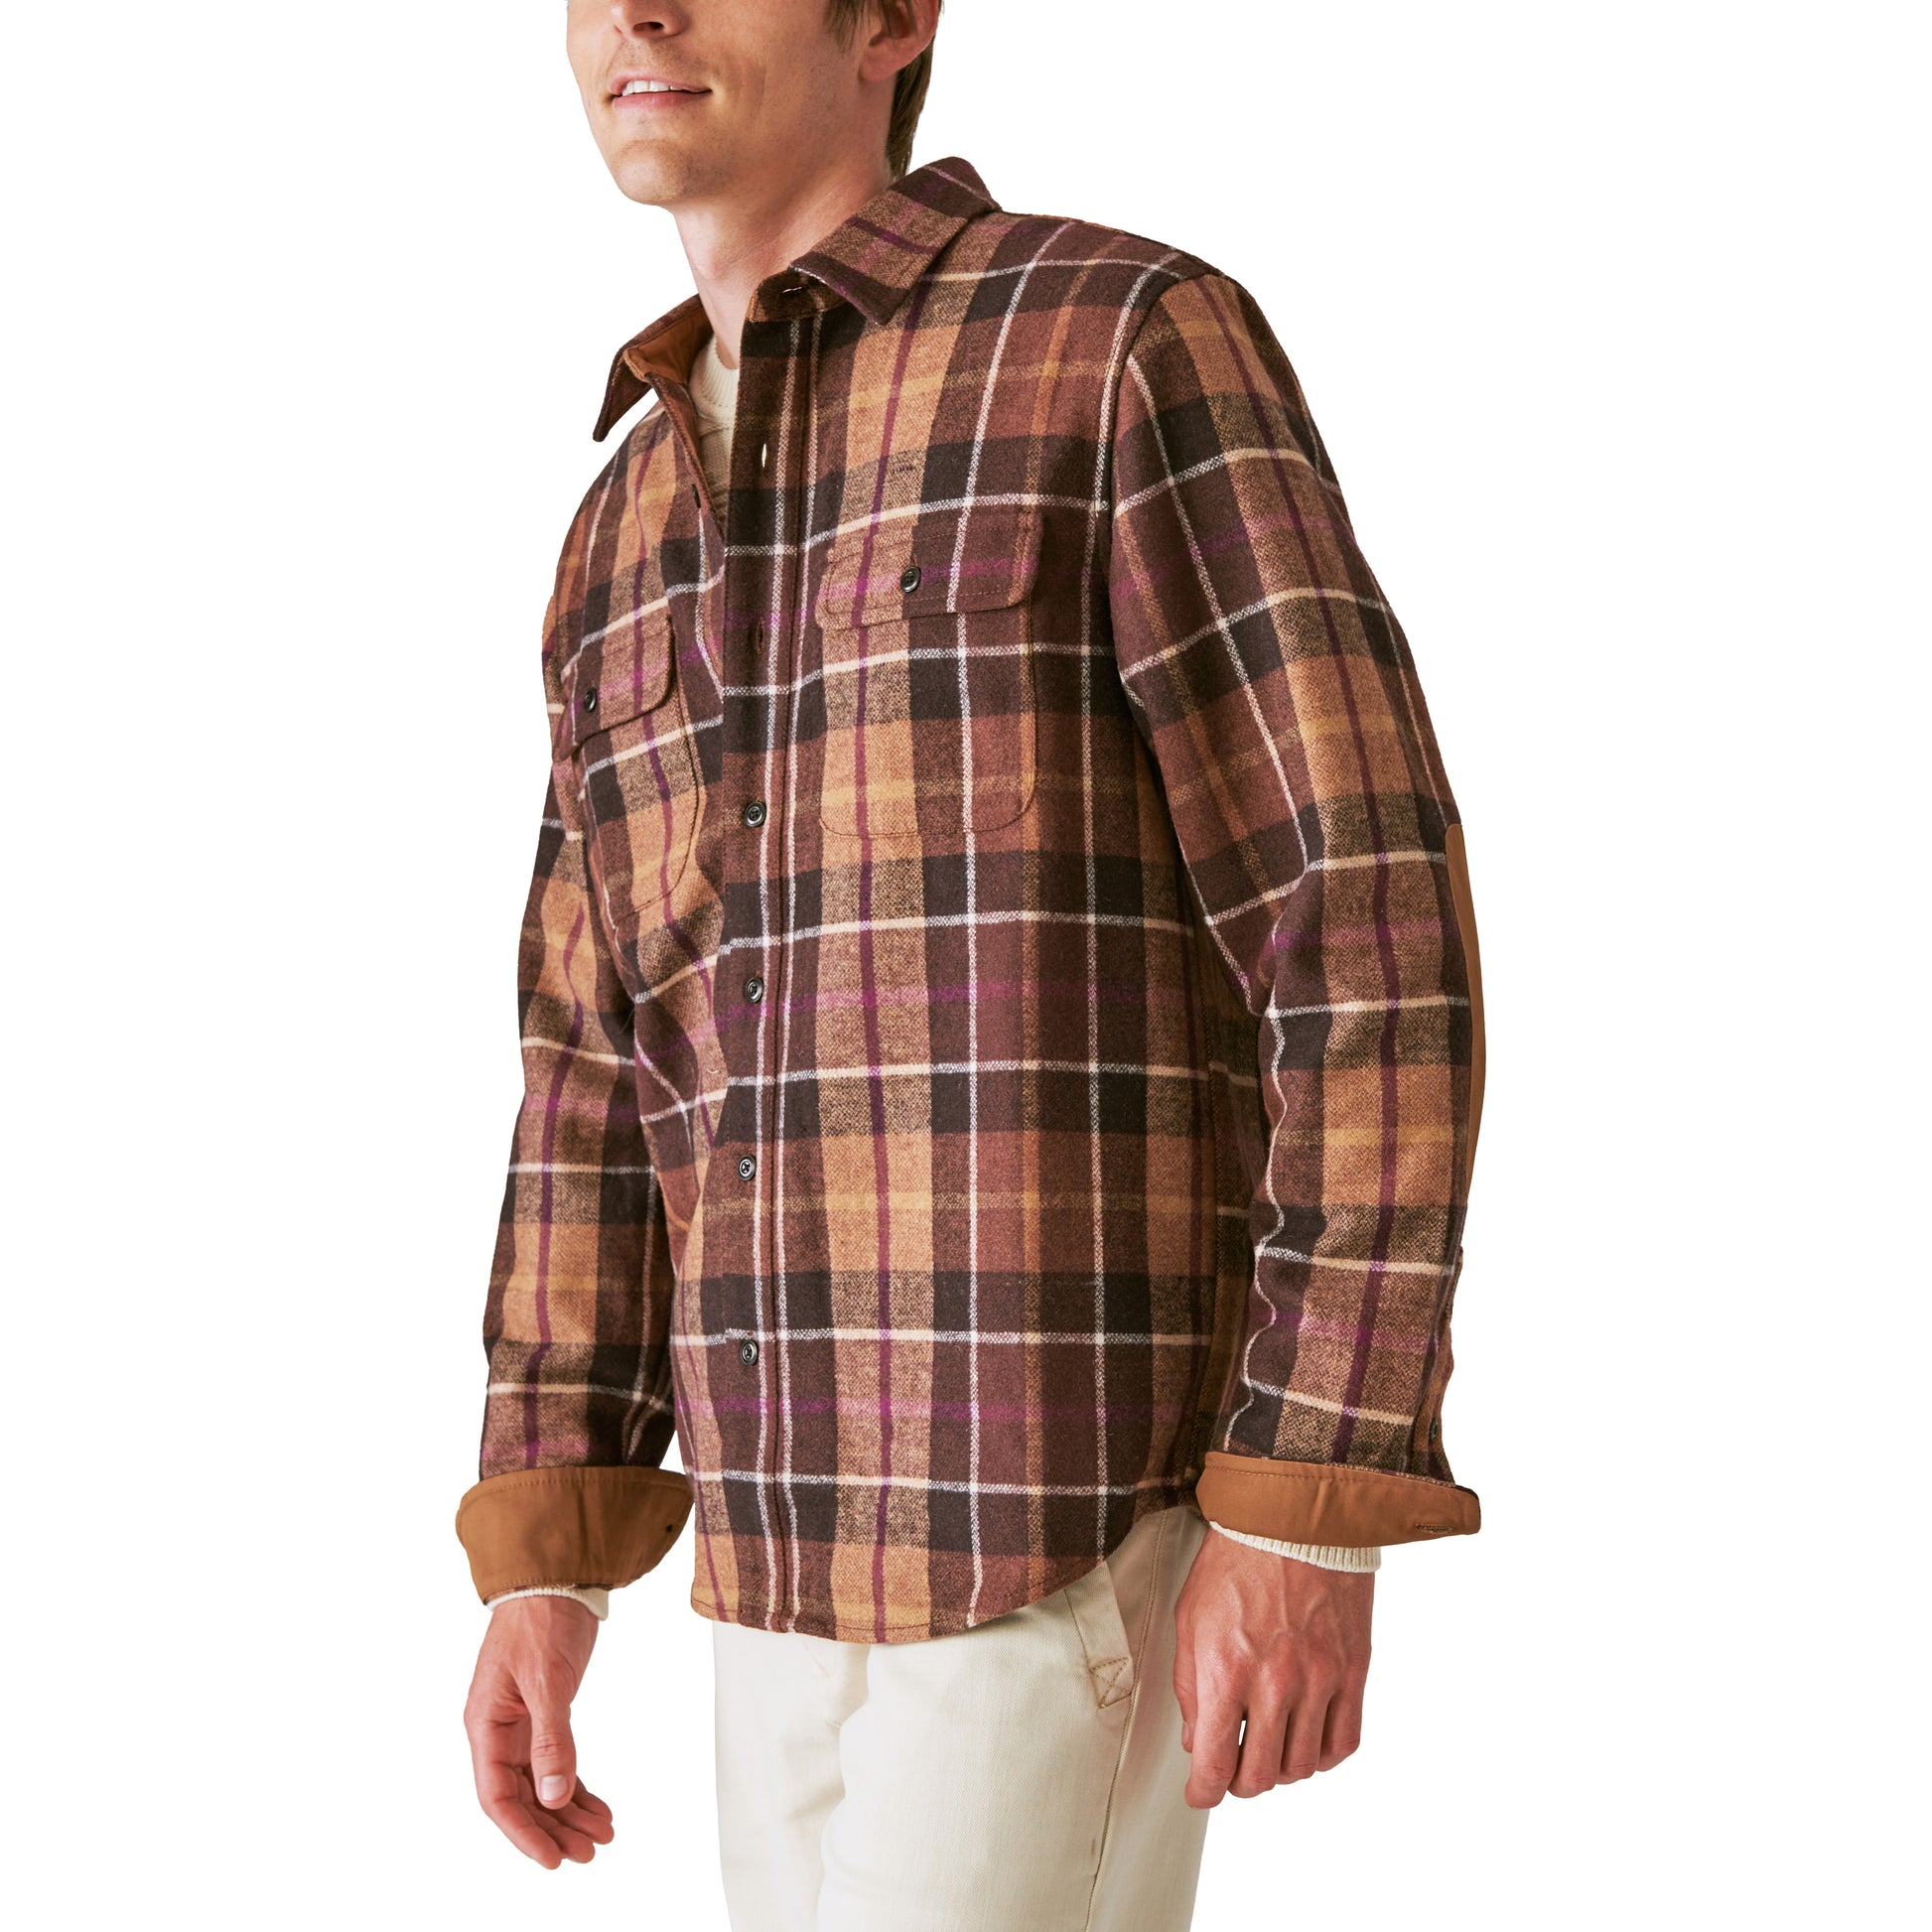 A man wearing a Guinness Wool Plaid Over Shirt With Elbow Patch - Brown Plaid from the Guinness Webstore US.